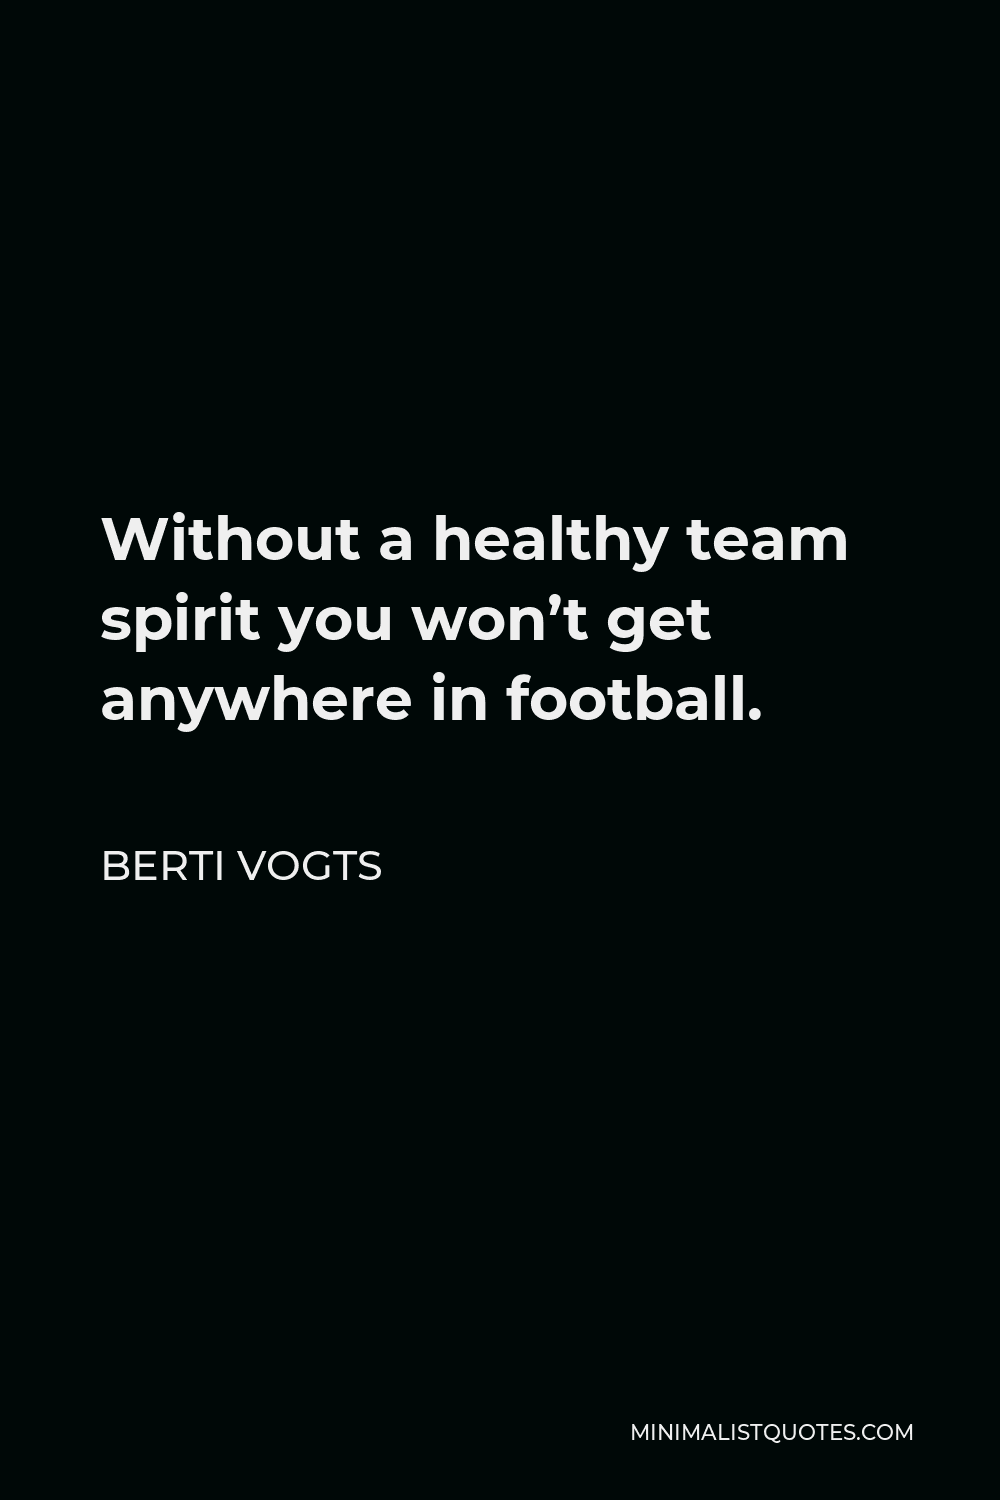 Berti Vogts Quote - Without a healthy team spirit you won’t get anywhere in football.